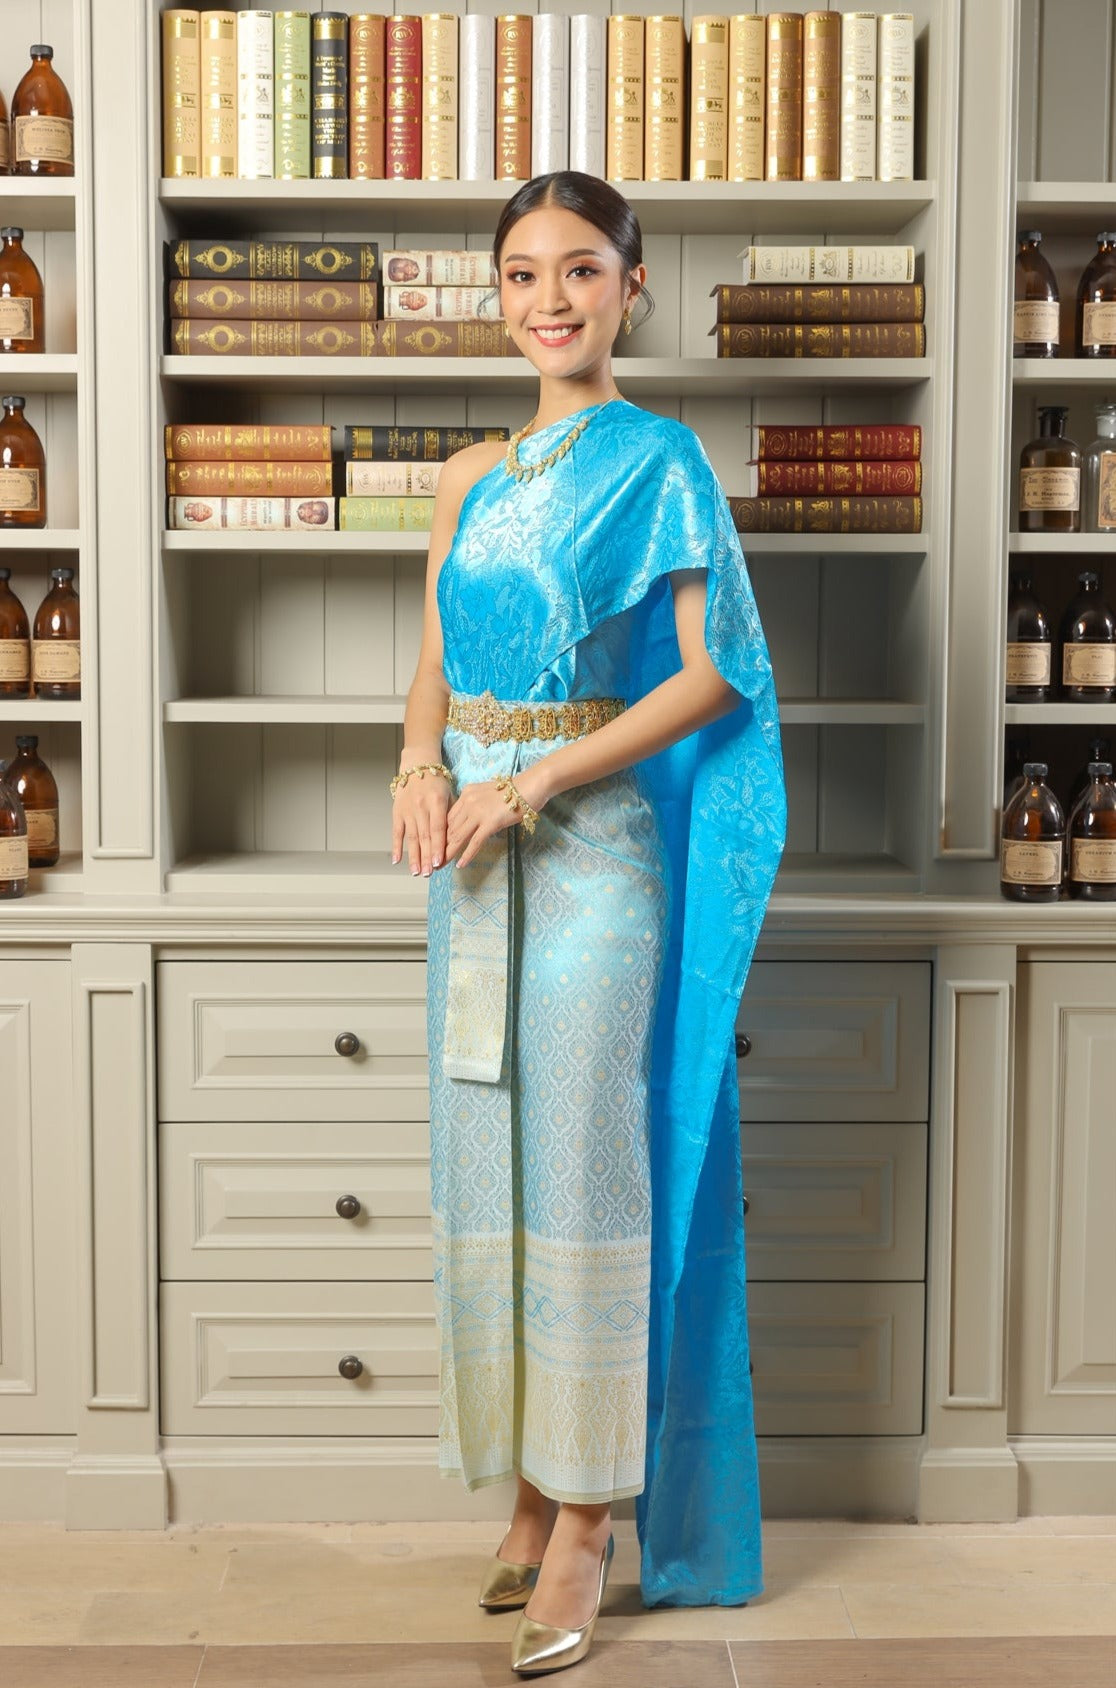 A woman posing in a sky blue traditional Thai dress.